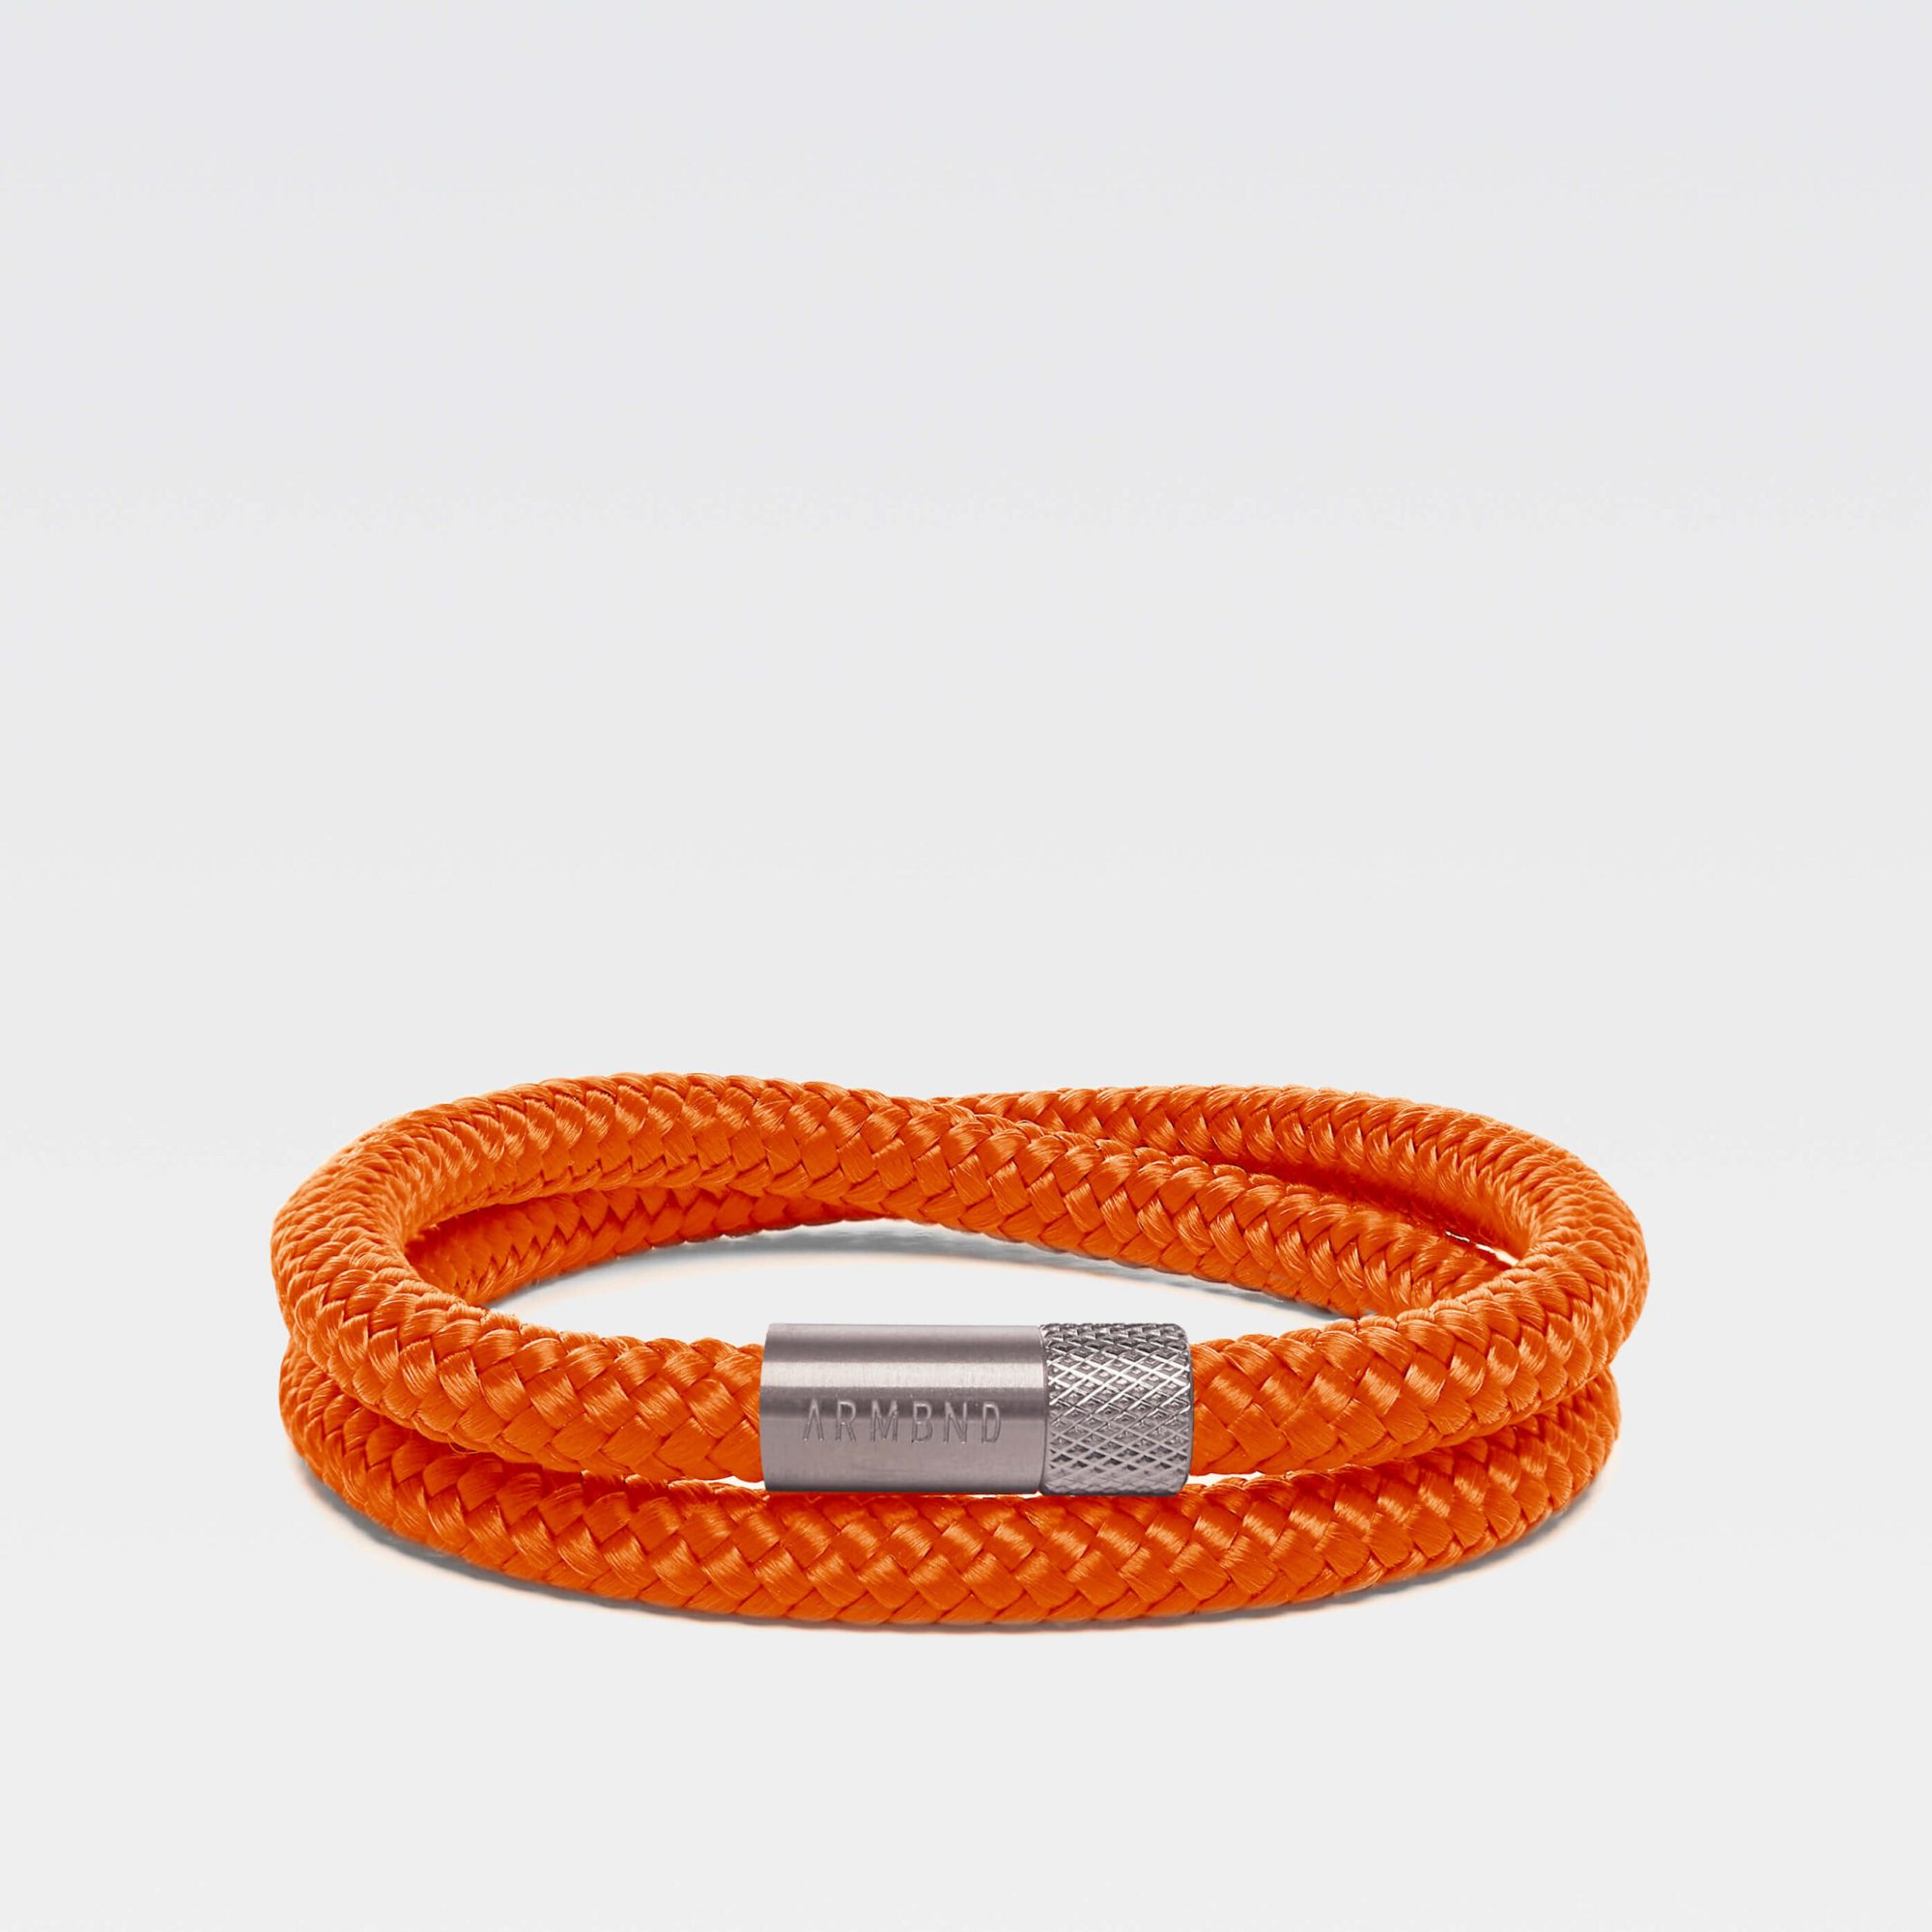 The double | Orange with silver clasp